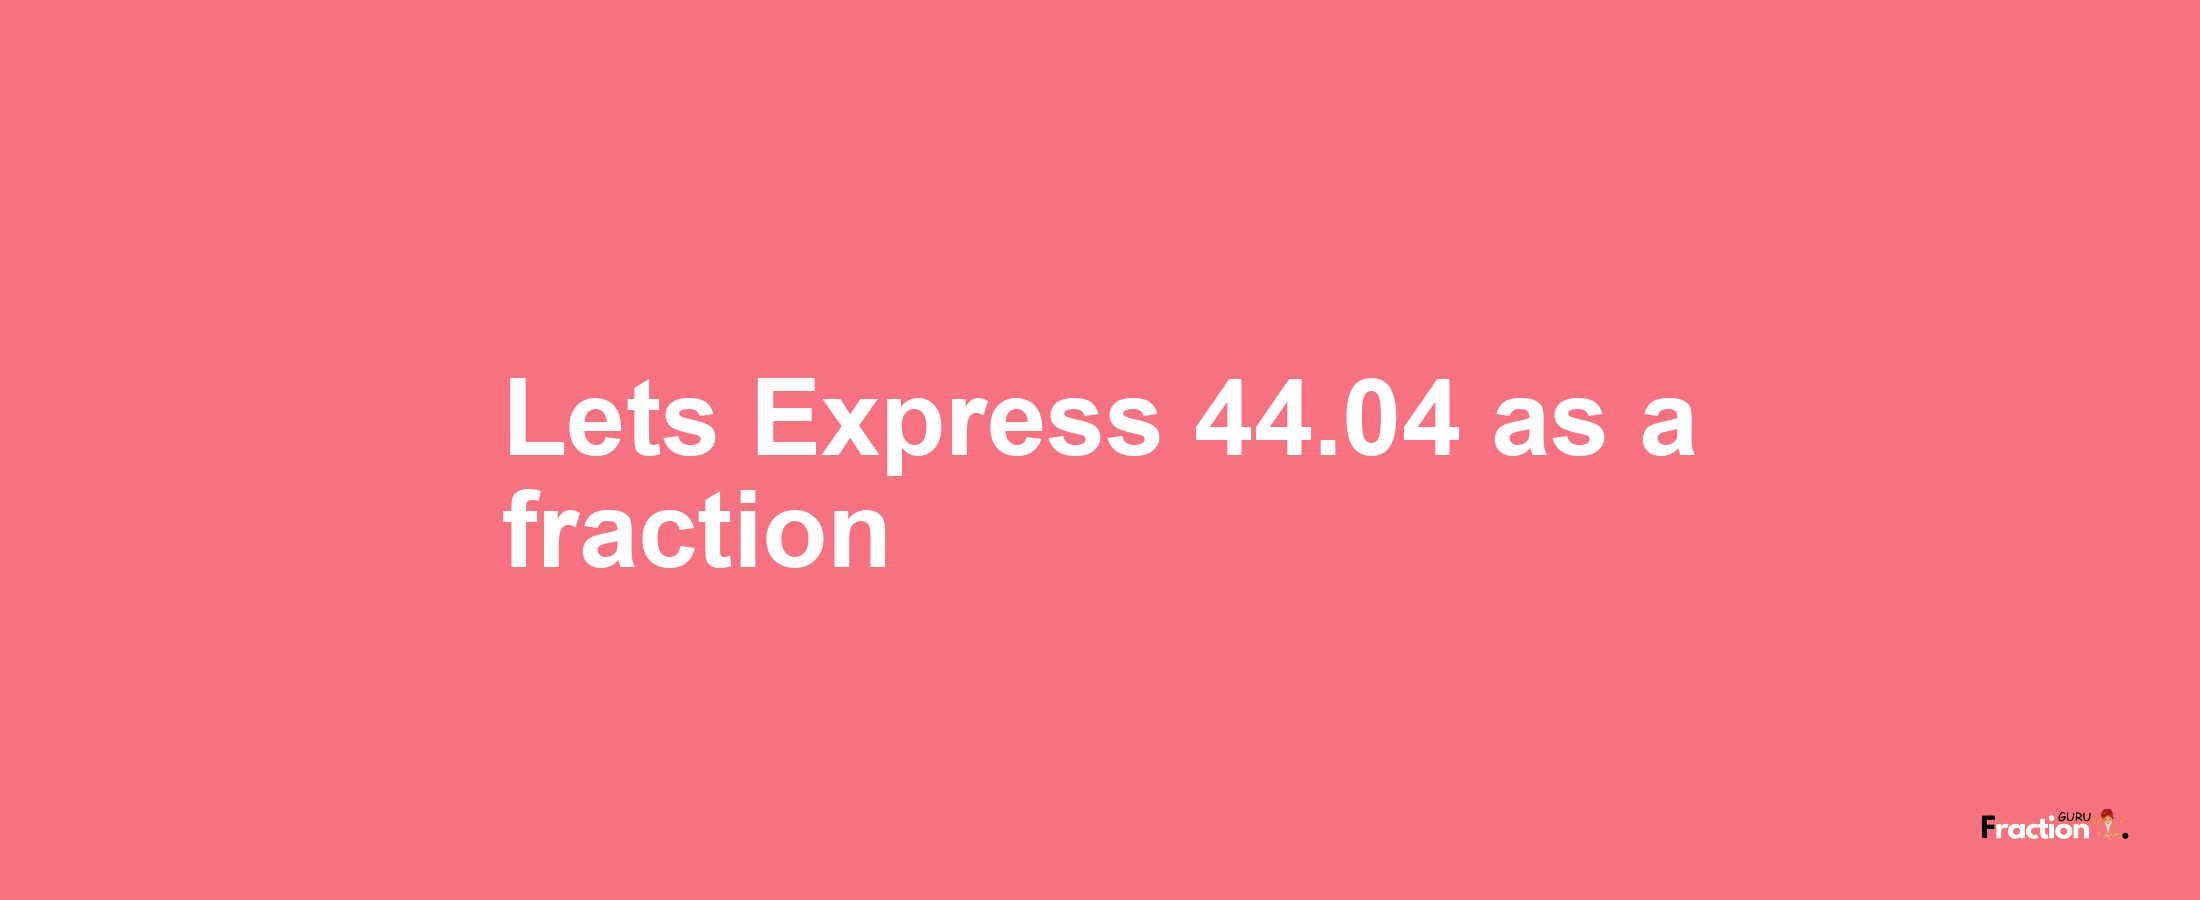 Lets Express 44.04 as afraction